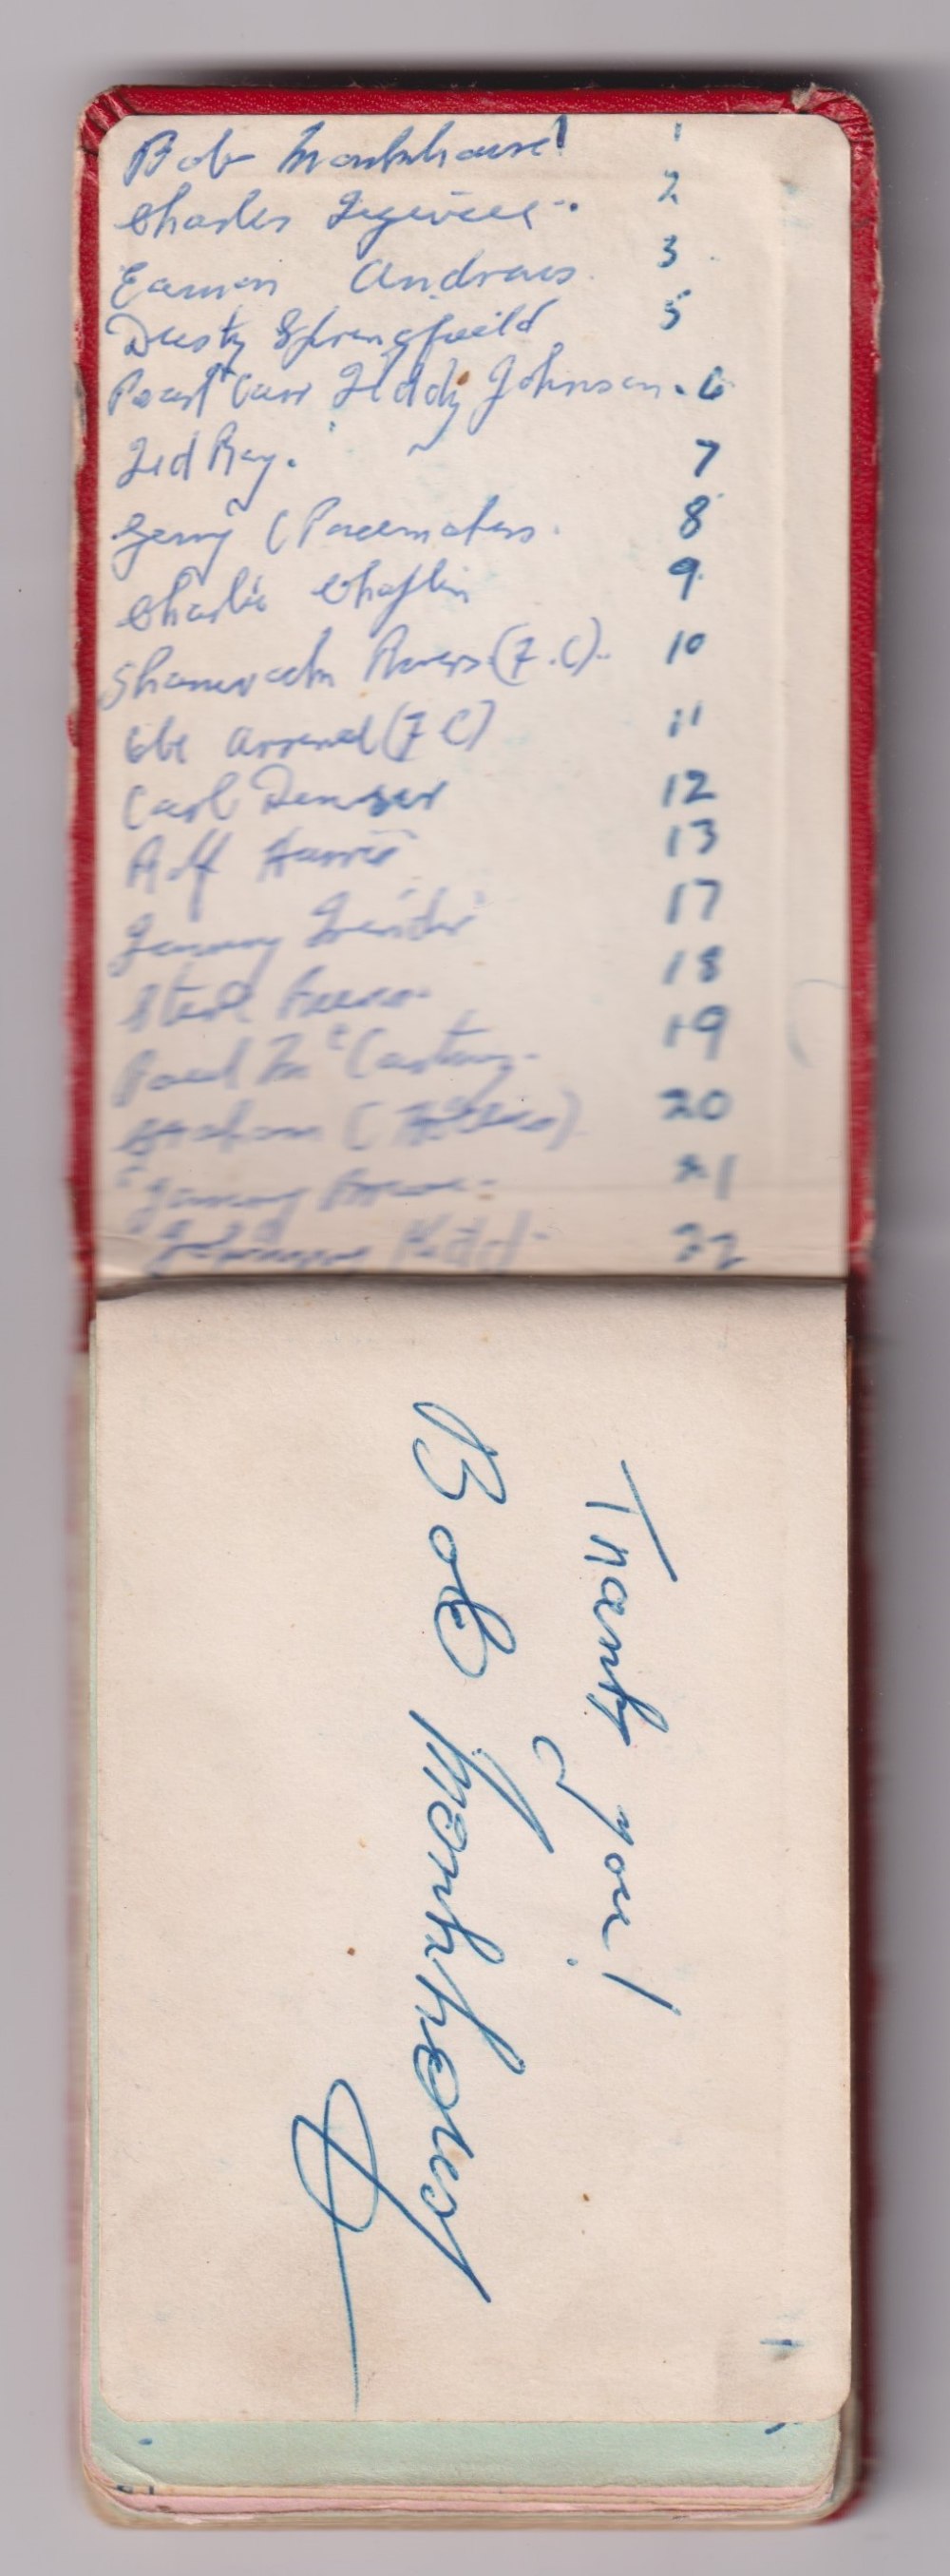 Autographs, a small autograph book belonging to a lady who worked in Heathrow Airport during the - Image 2 of 4